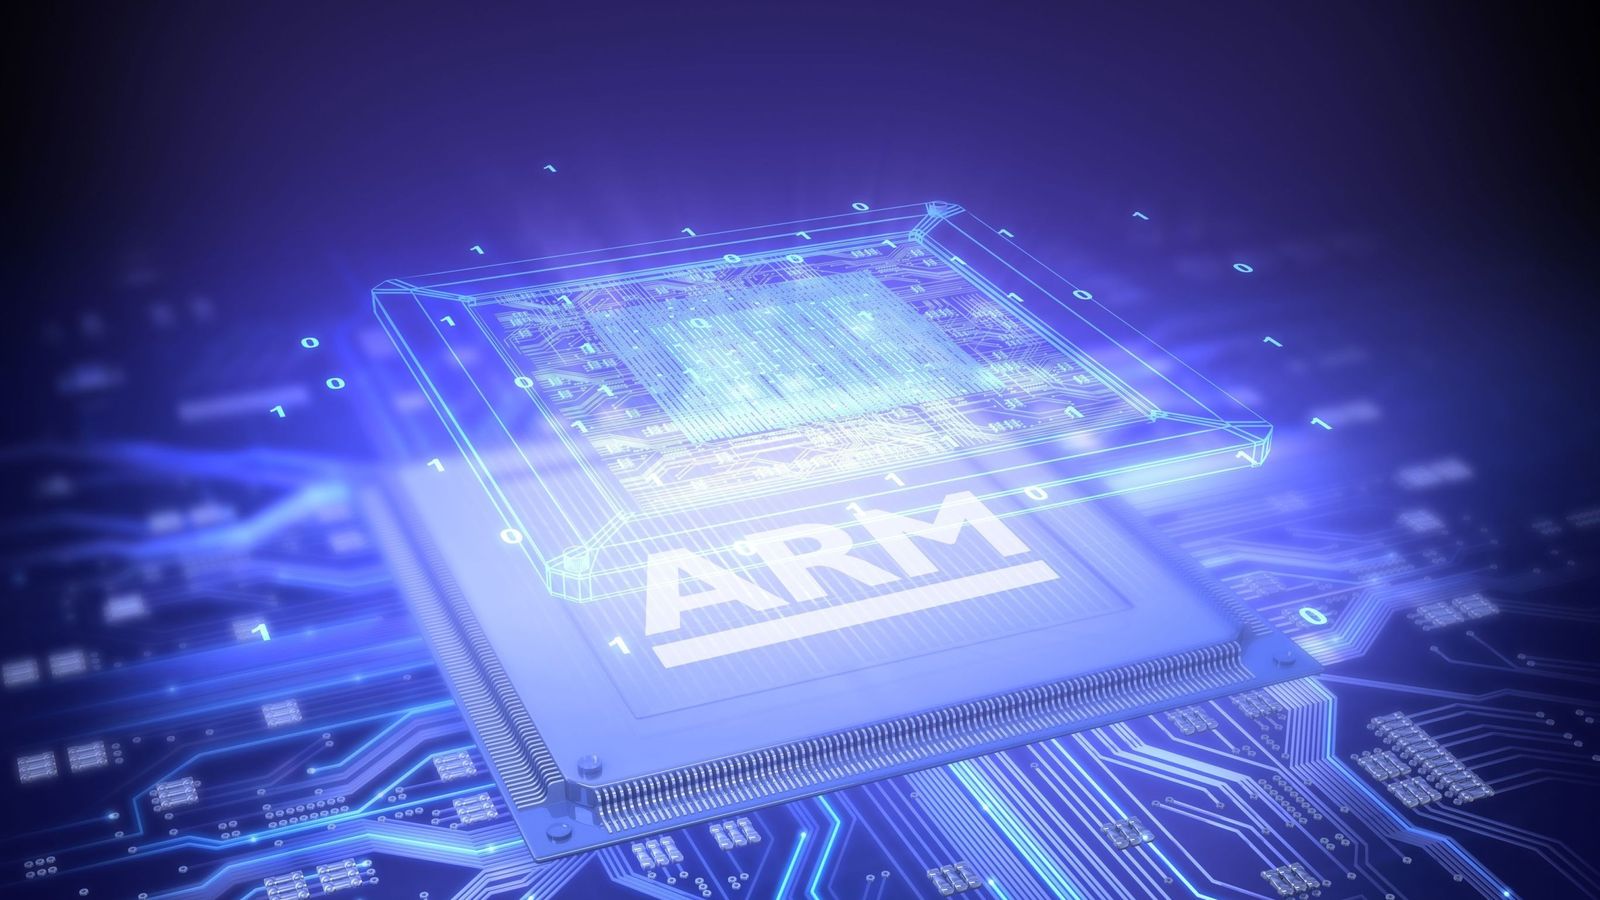 Arm takeover: Government orders national security and competition probe over $40bn buyout by Nvidia